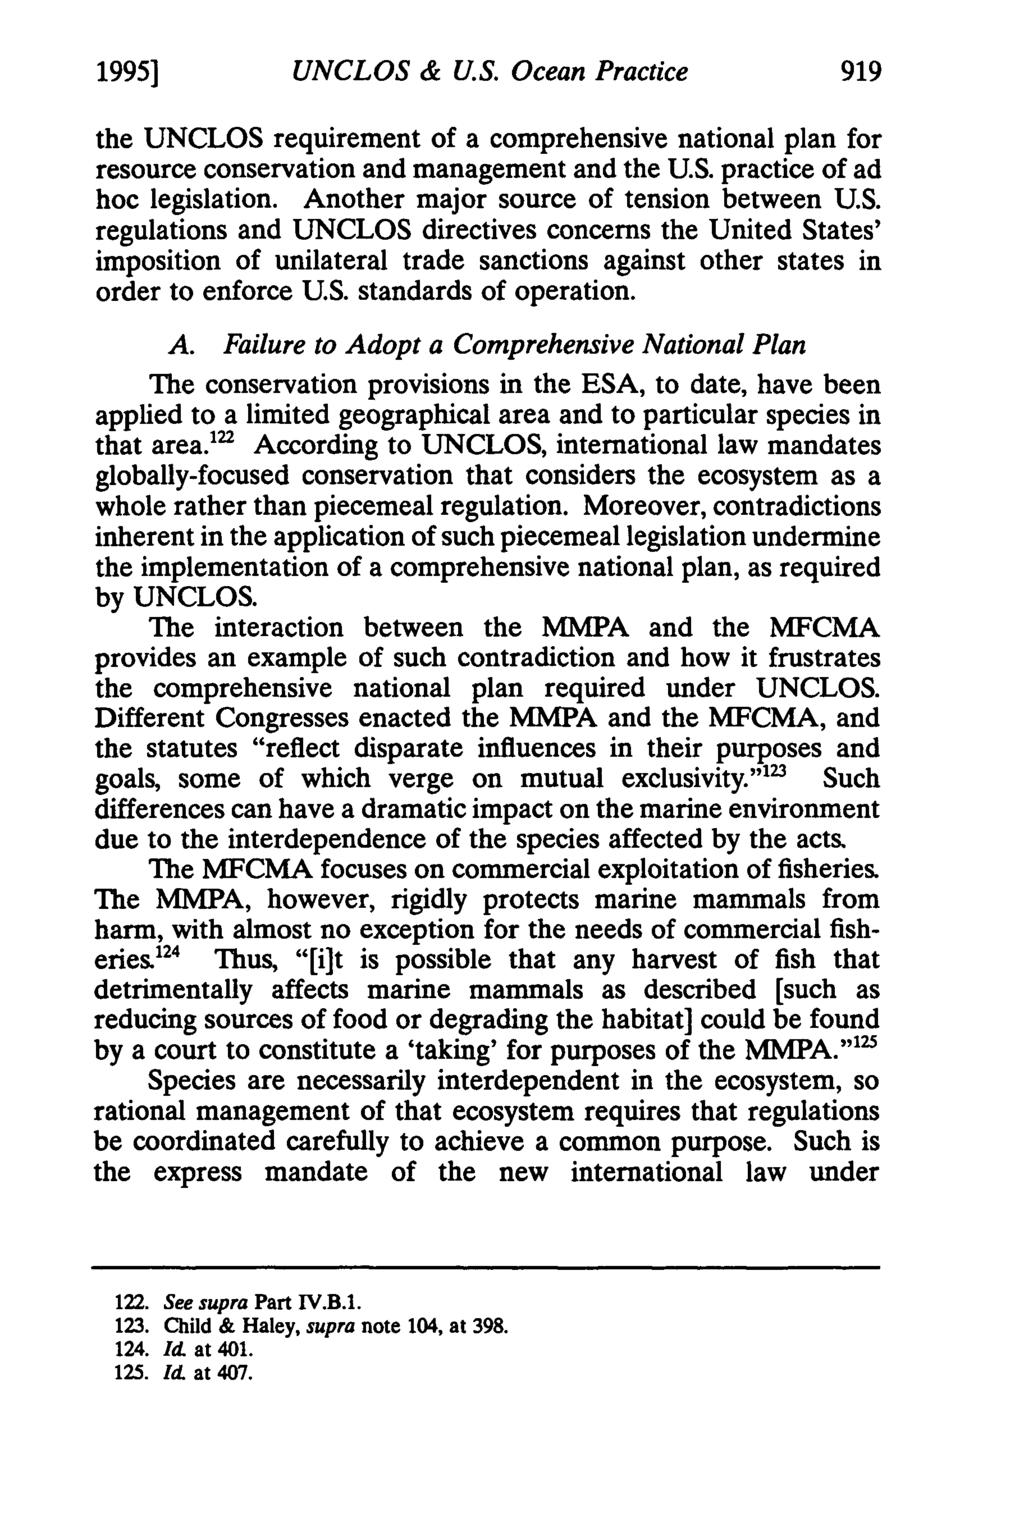 1995] UNCLOS & U.S. Ocean Practice 919 the UNCLOS requirement of a comprehensive national plan for resource conservation and management and the U.S. practice of ad hoc legislation.